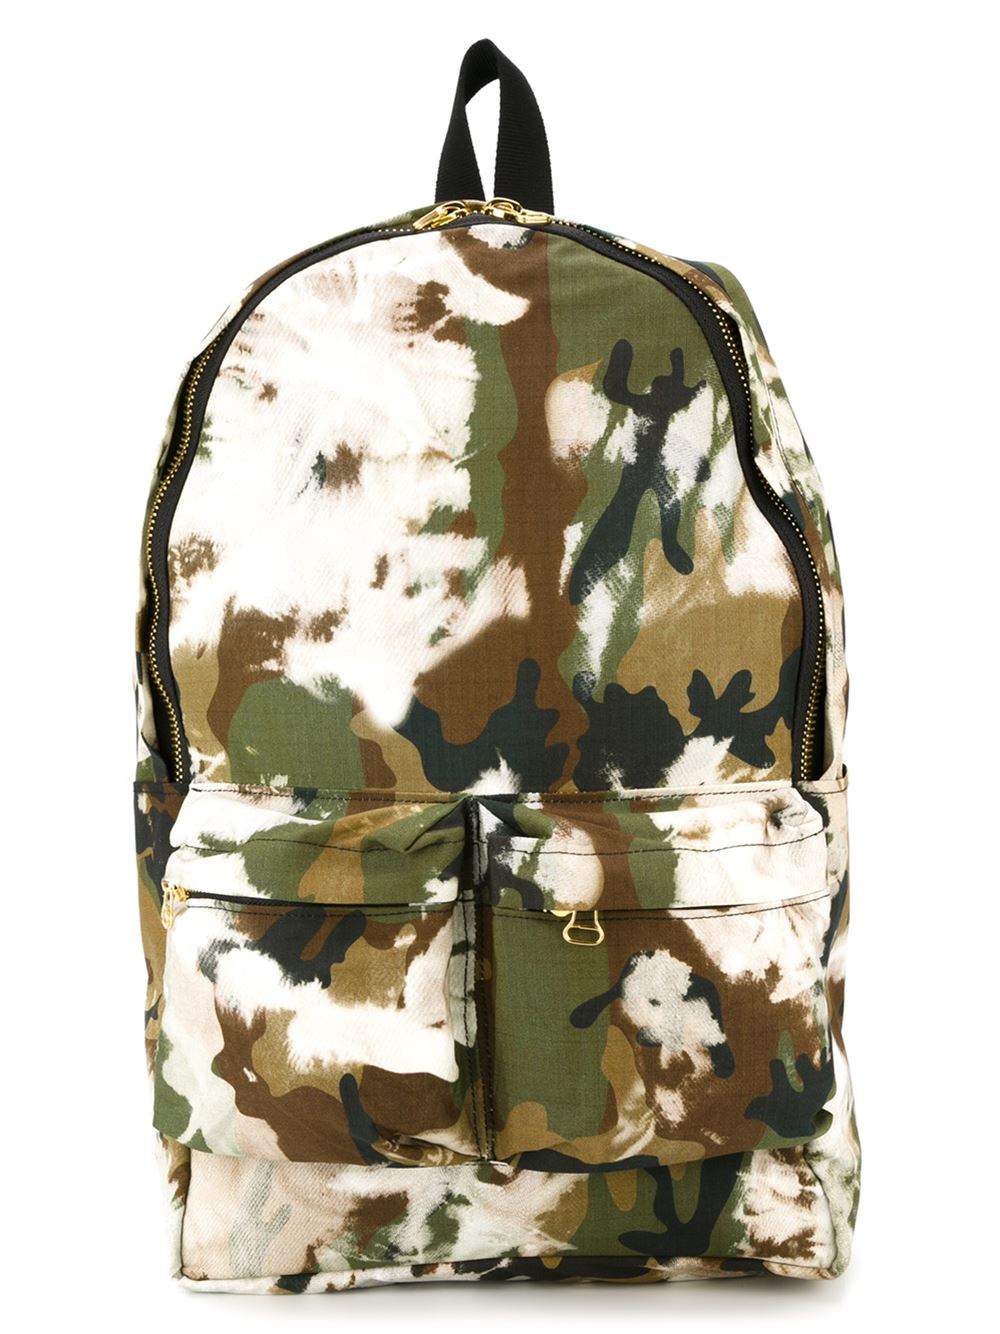 Off-White camouflage print backpack Cheap Women Bags Backpacks